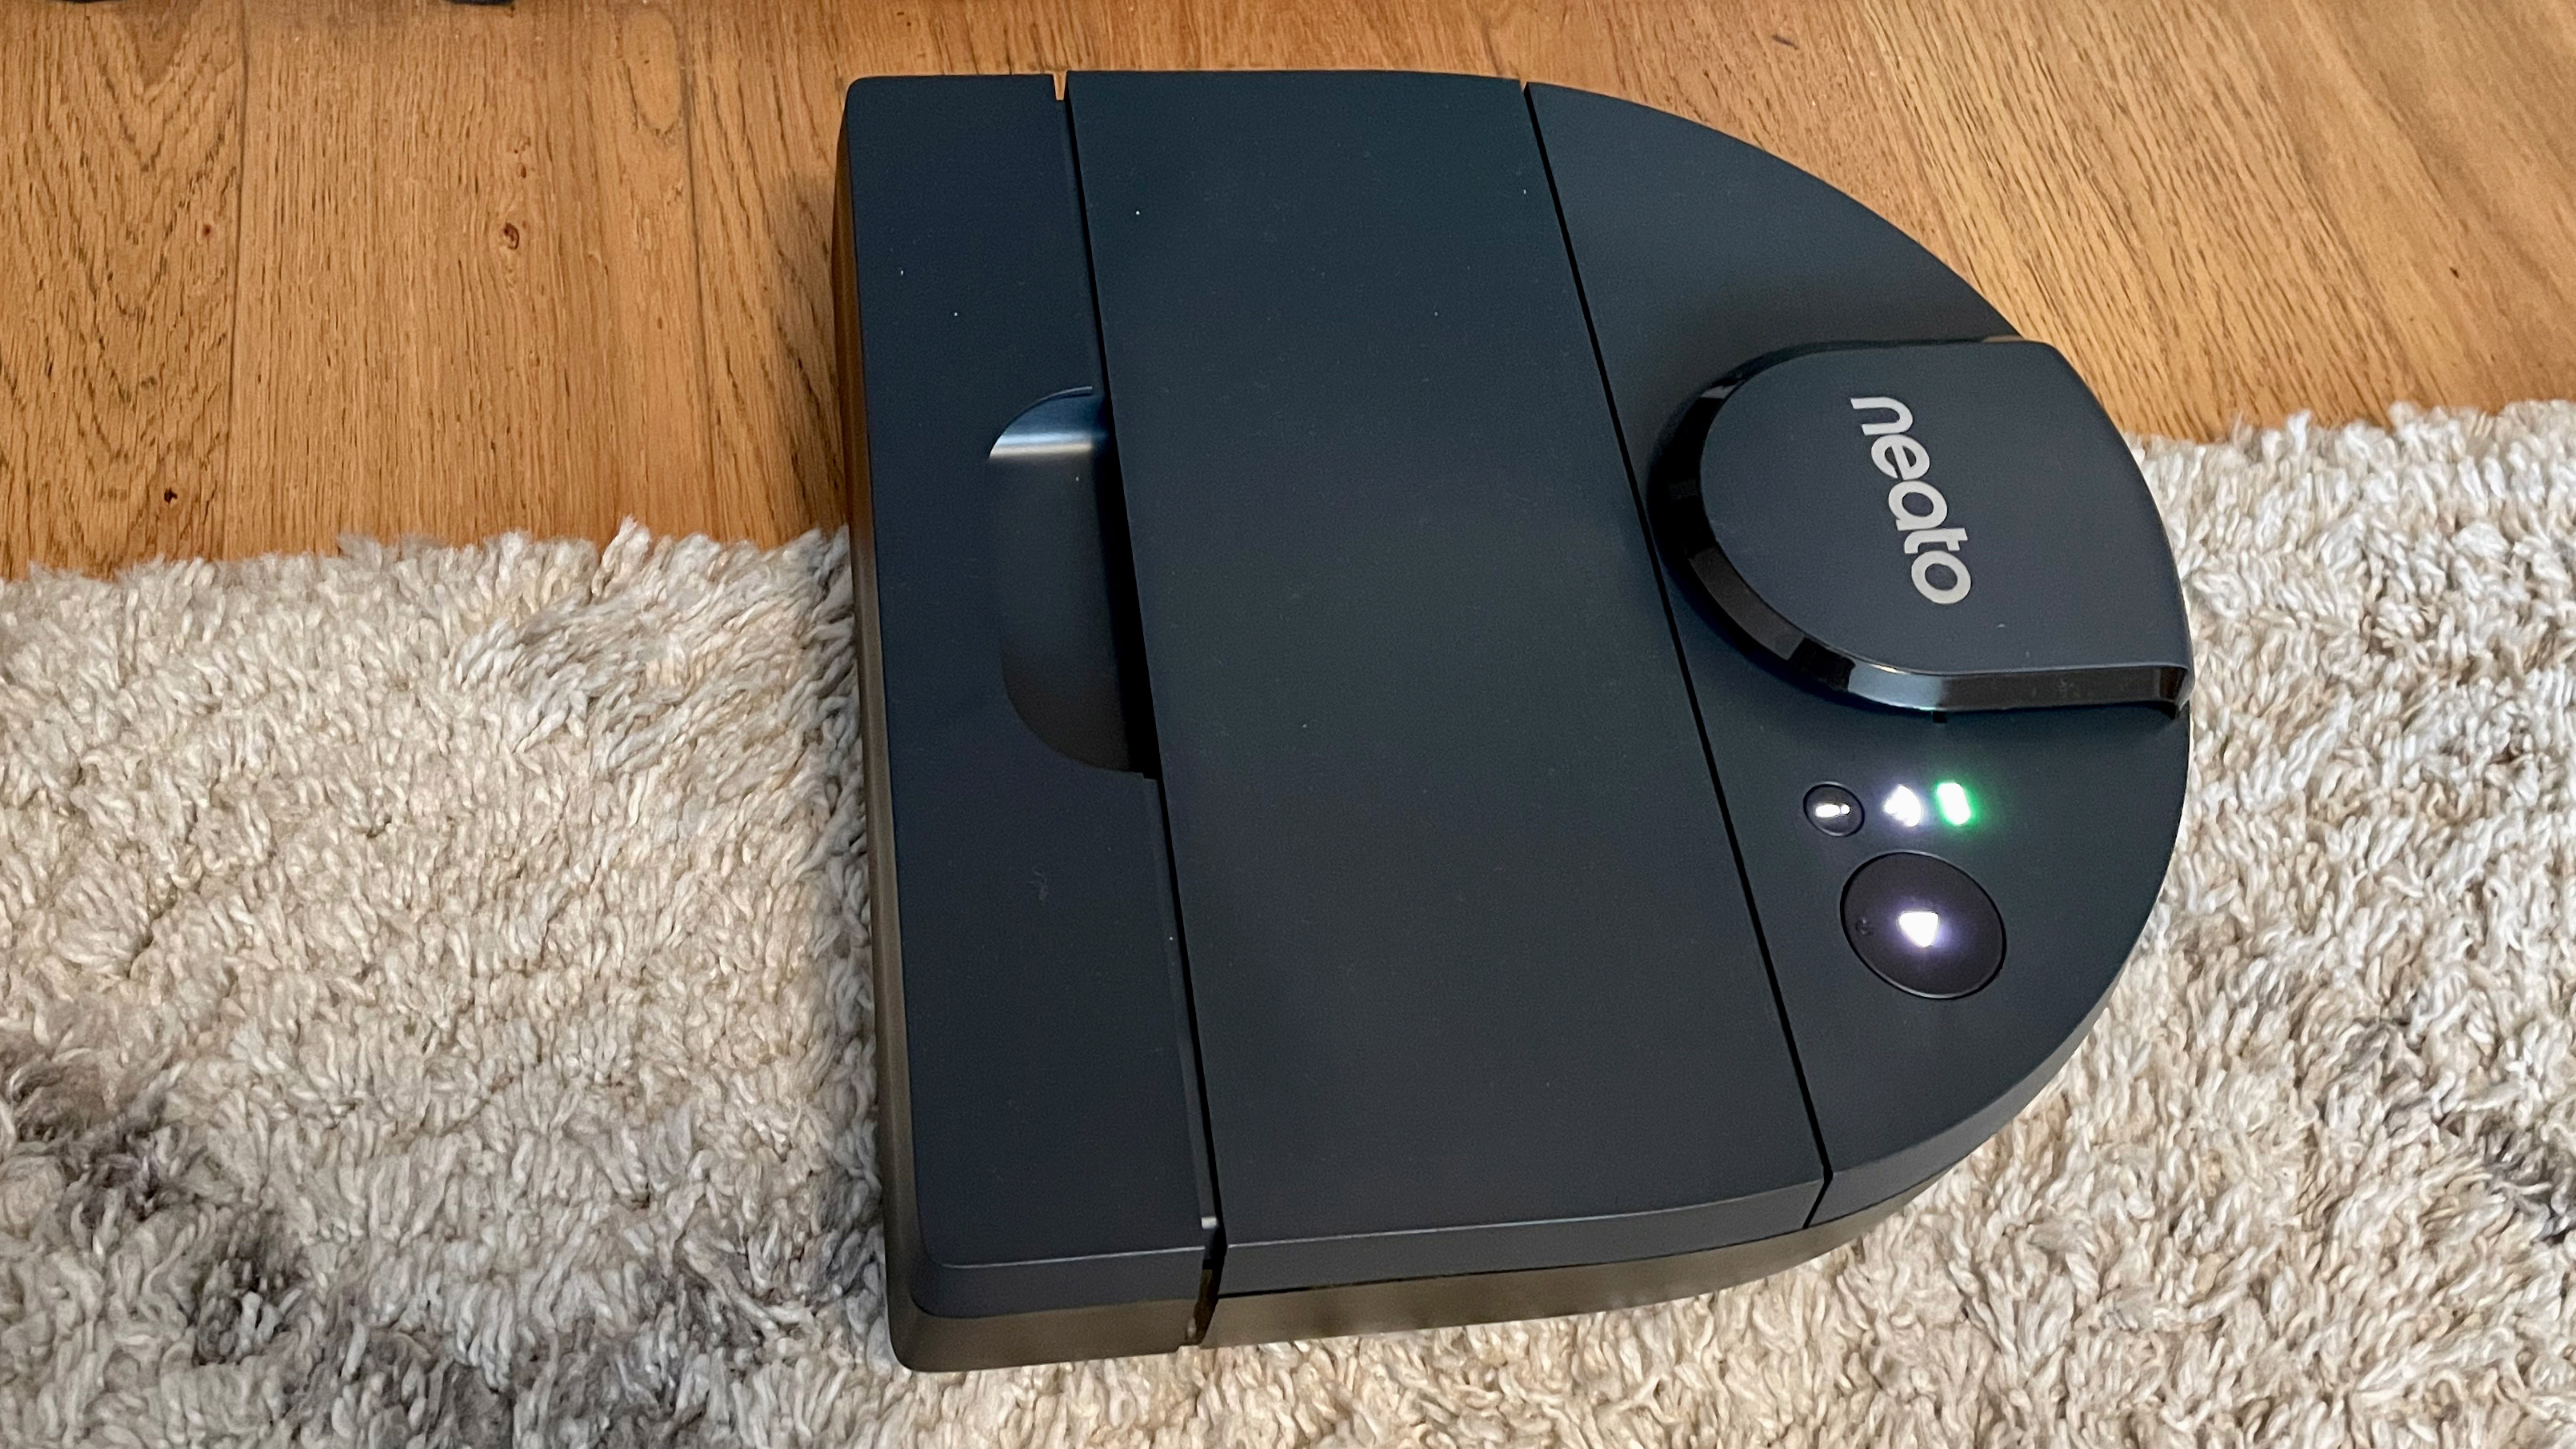 The Neato D8 copes well when cleaning carpet and hard wood